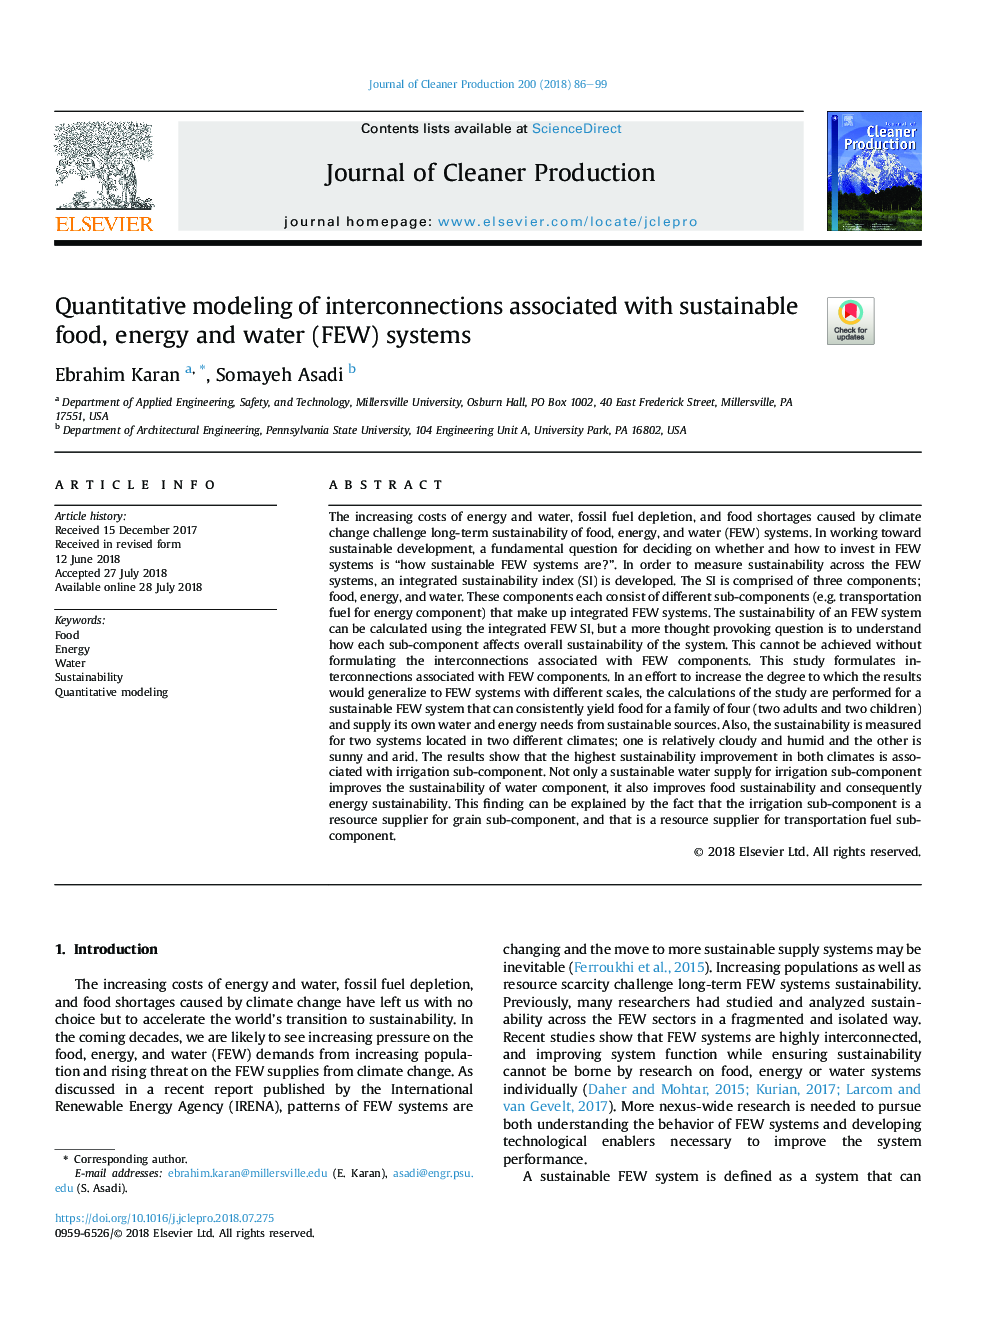 Quantitative modeling of interconnections associated with sustainable food, energy and water (FEW) systems